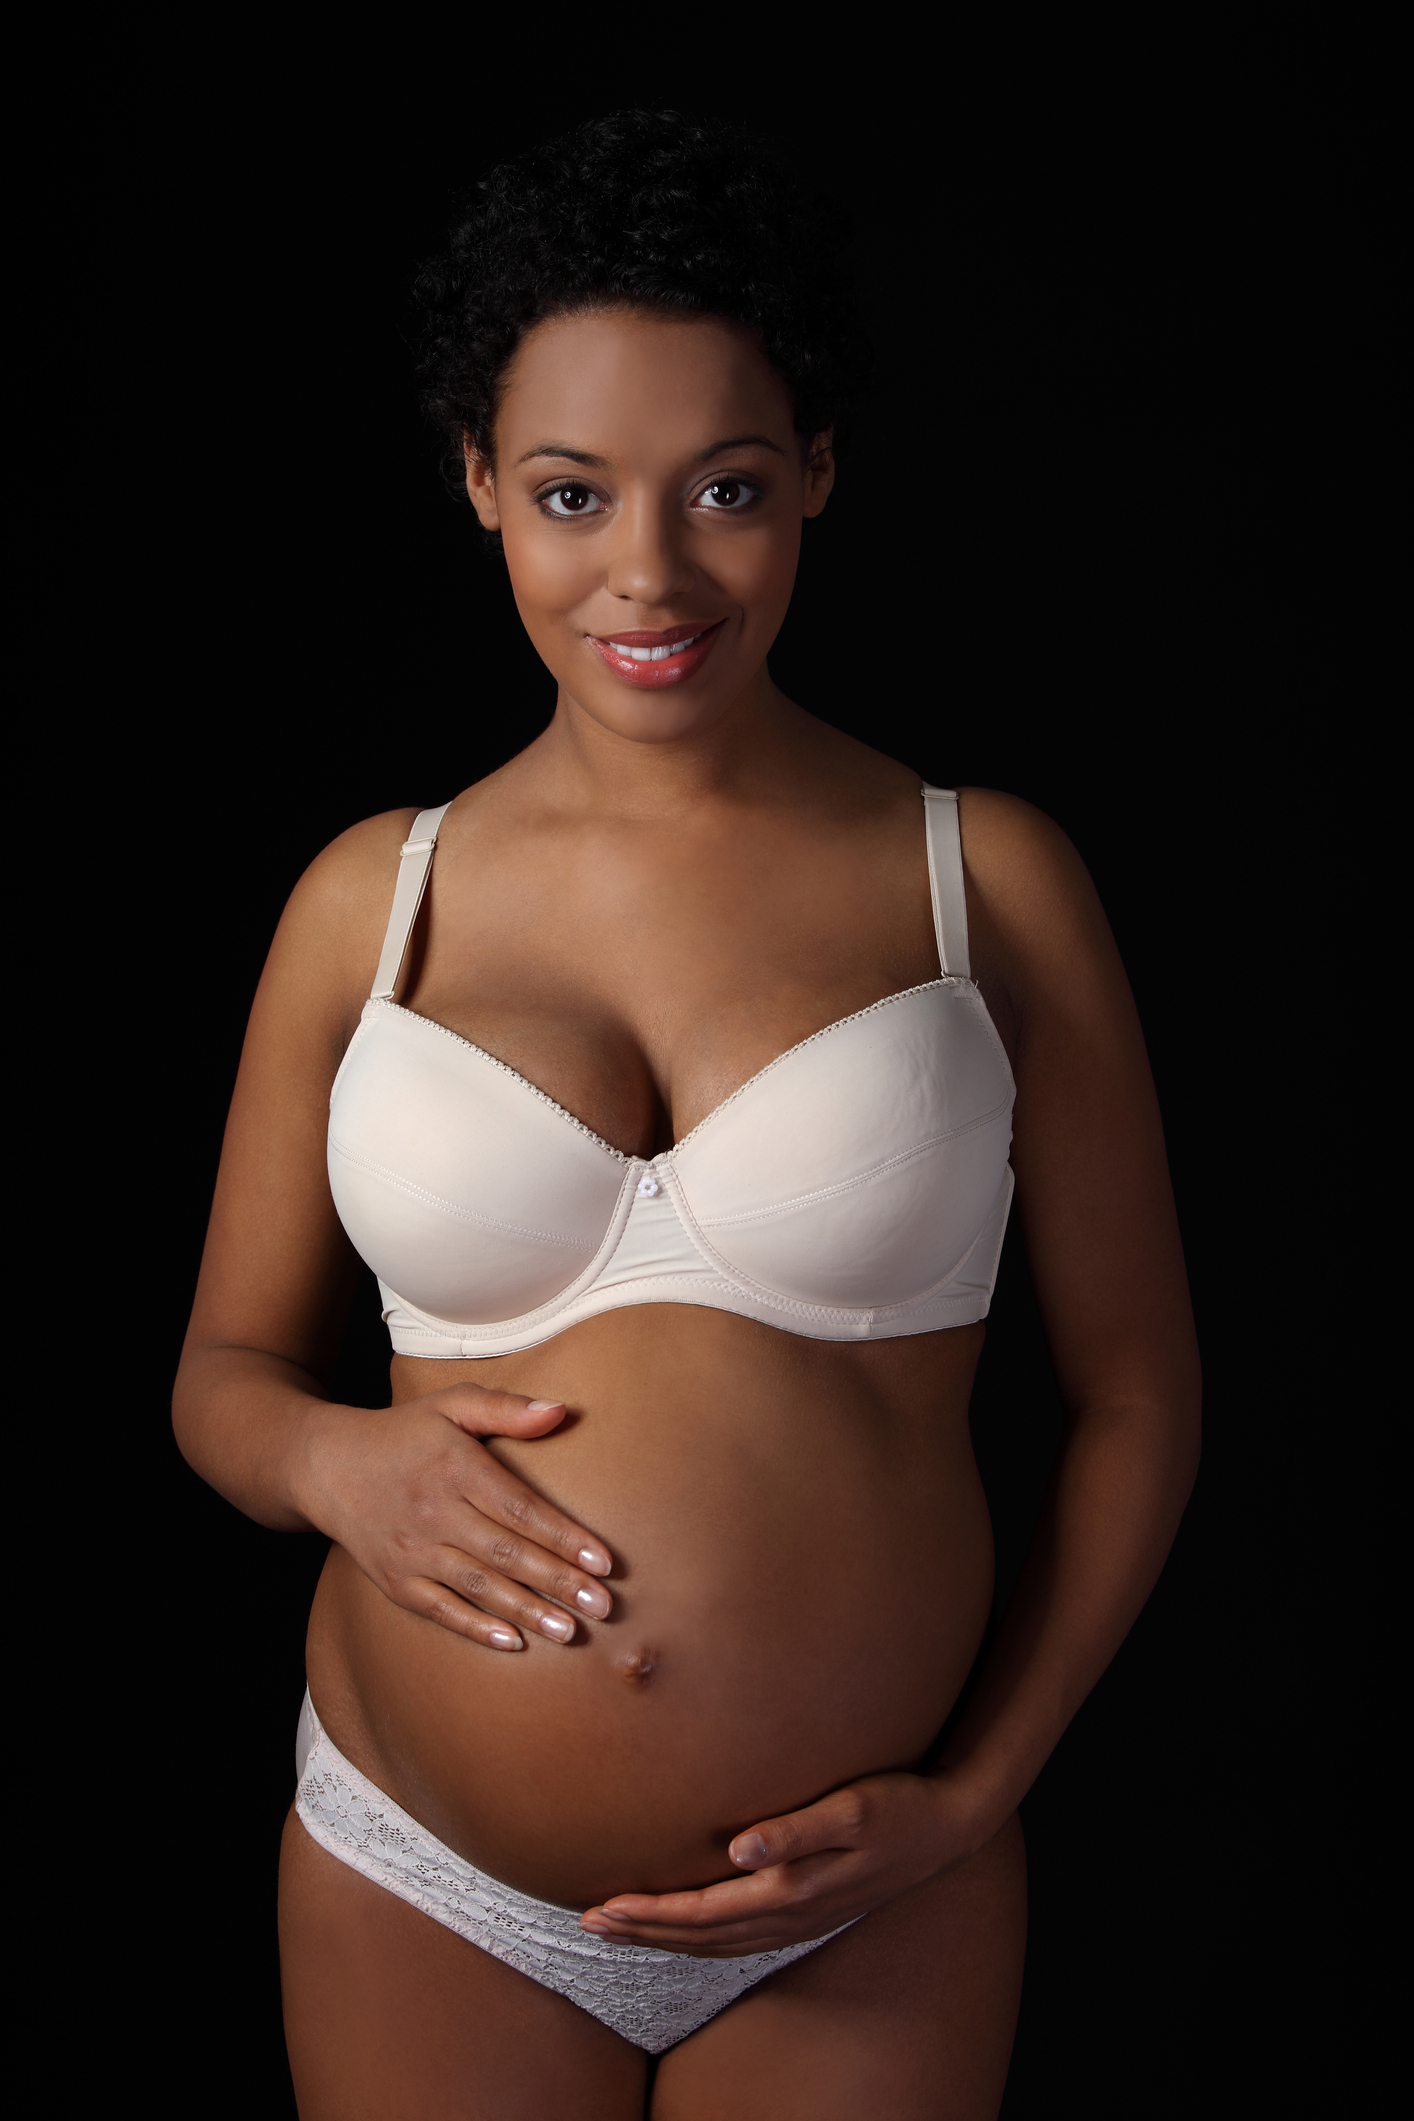 Portrait Of Smiling Young Woman Touching Abdomen While Standing Against Black Background